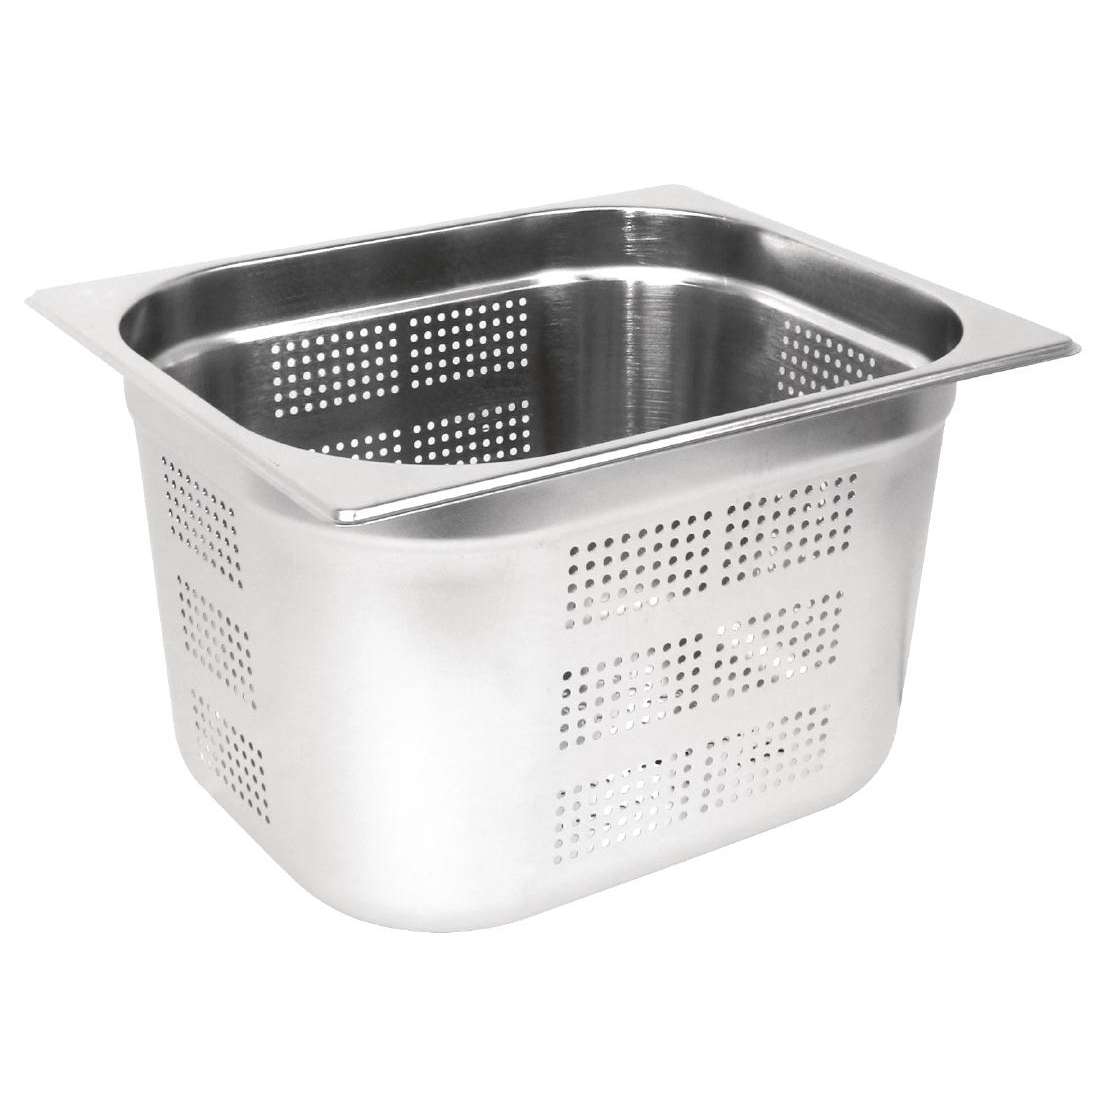 Vogue Stainless Steel Perforated GN 1/2 Pan 200mm